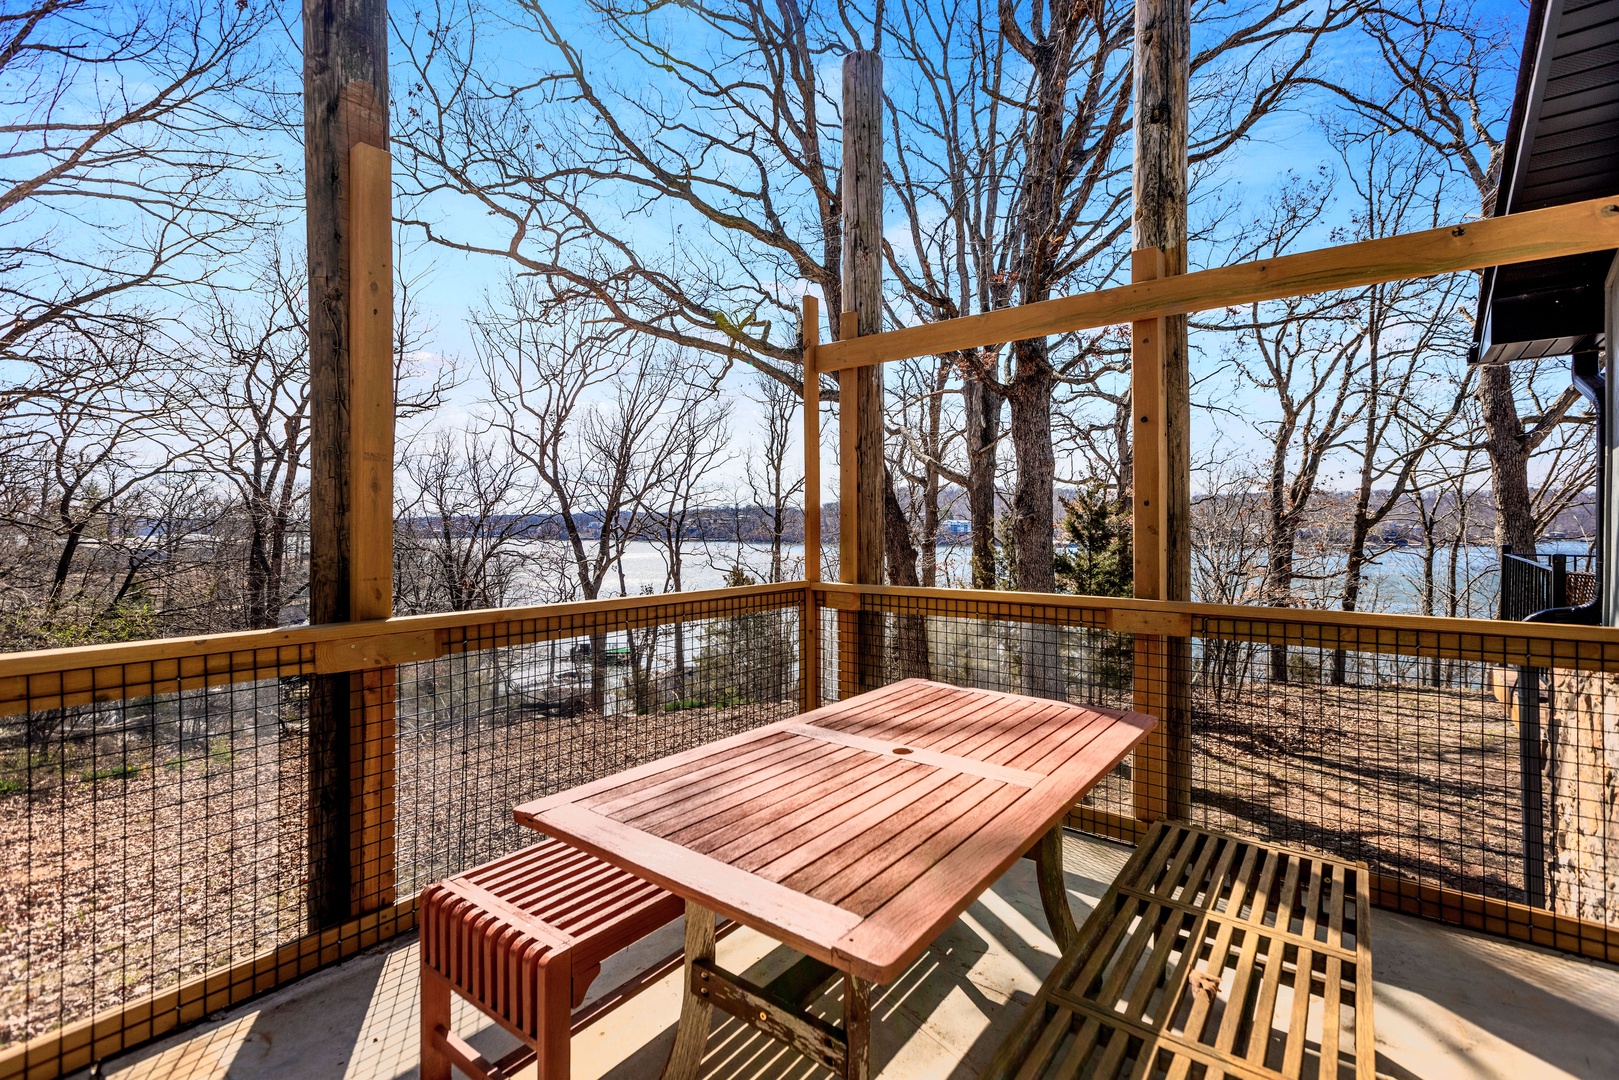 Enjoy a serene view of the lake from the patio off the bedroom